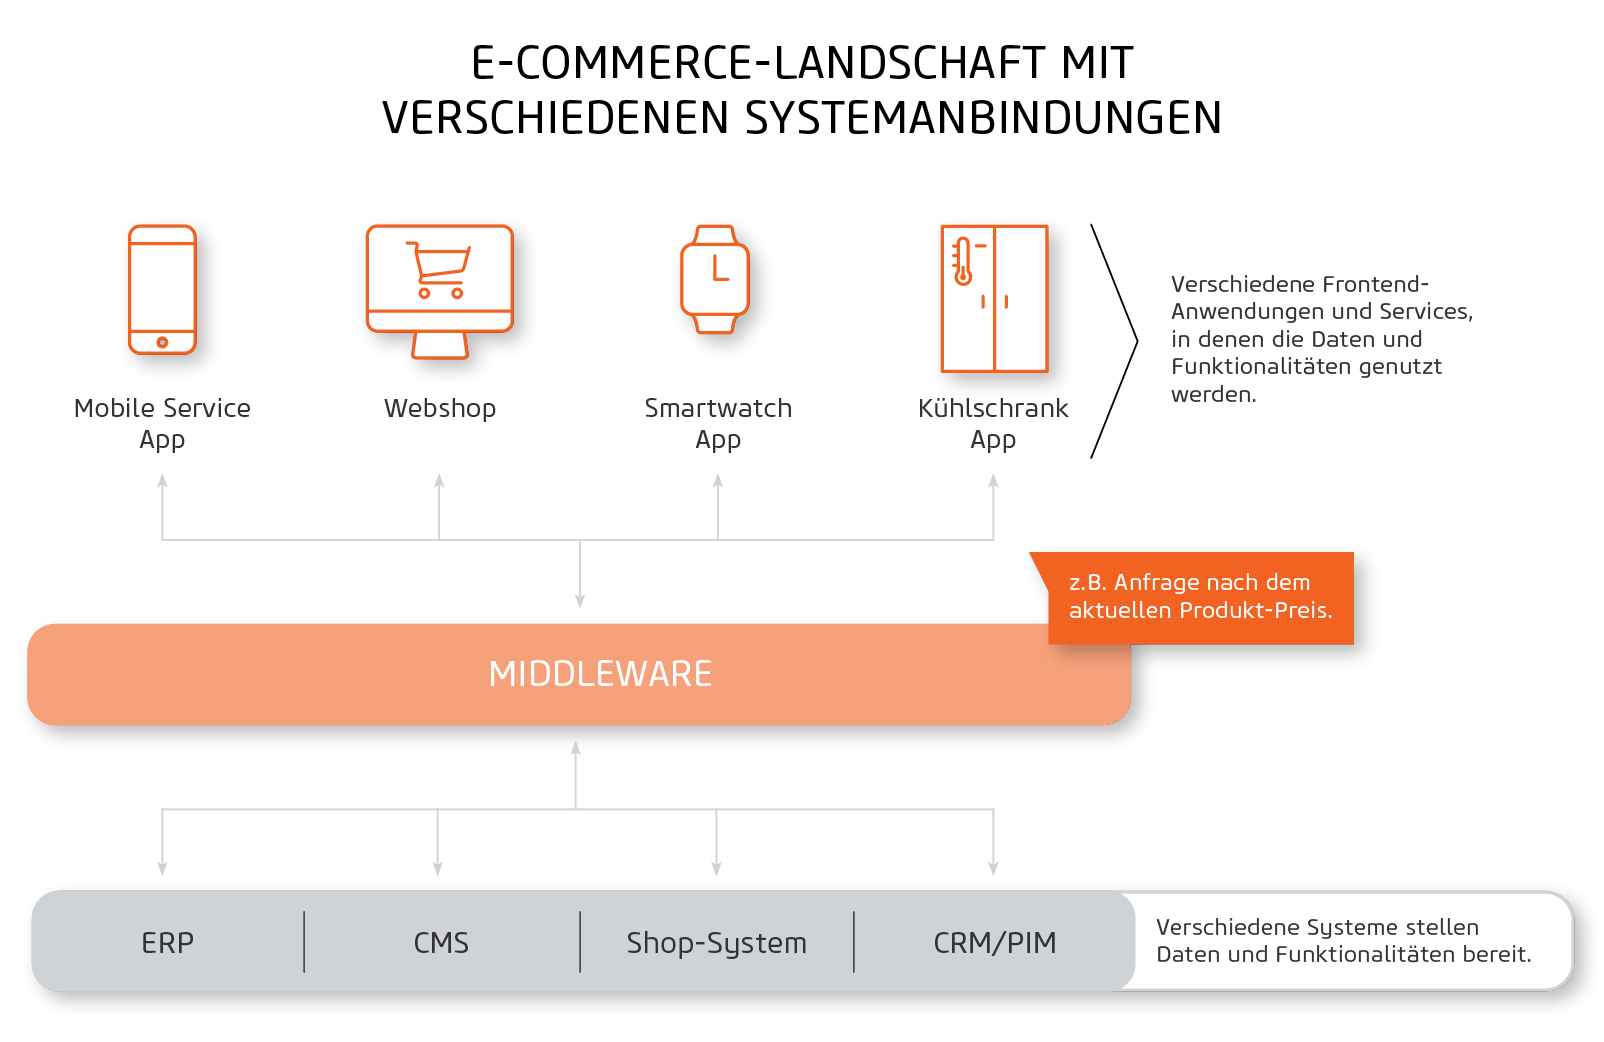 A diagram showing various frontend applications (Mobile Service App, Webshop, Smartwatch App, Refrigerator App) connected through middleware to backend systems (ERP, CMS, Shop-System, CRM/PIM).